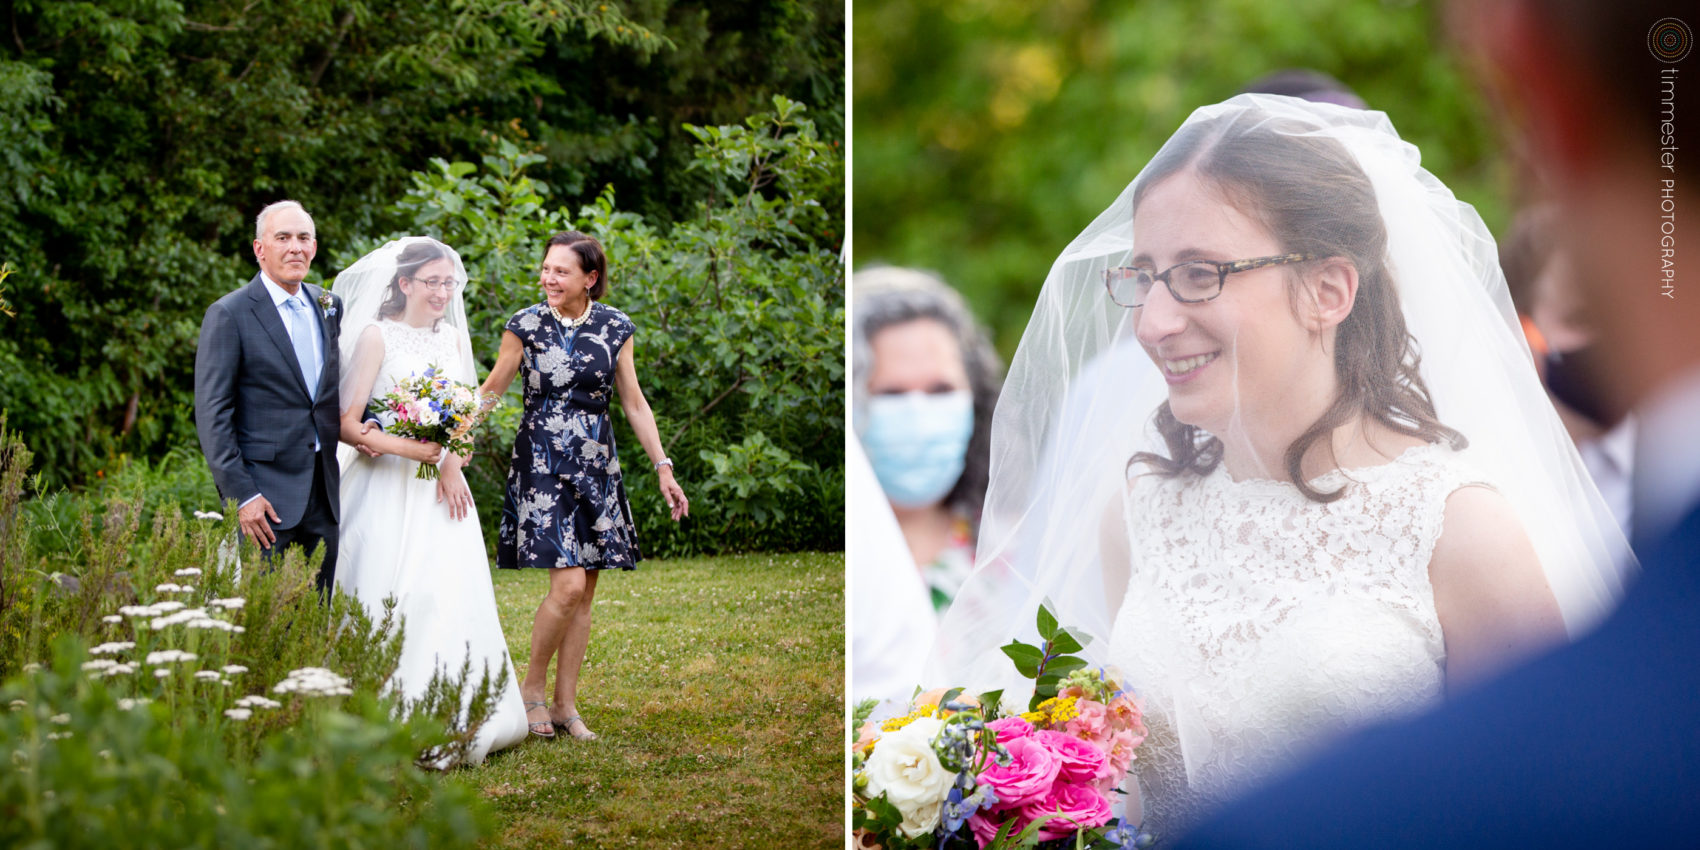 A Museum of Life and Science outdoor wedding in Durham